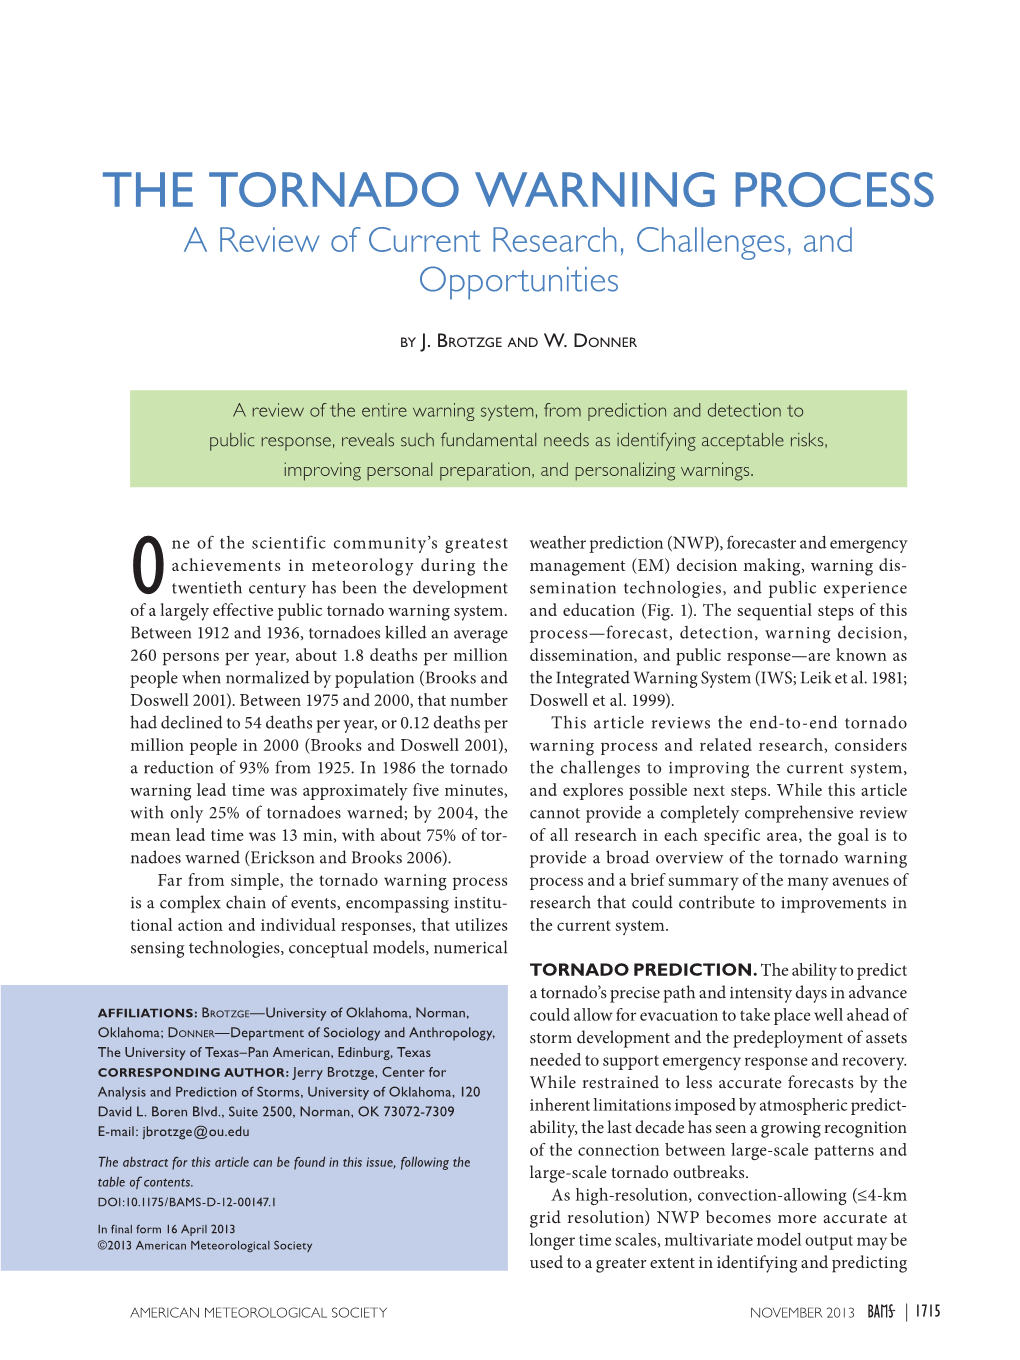 The Tornado Warning Process a Review of Current Research, Challenges, and Opportunities